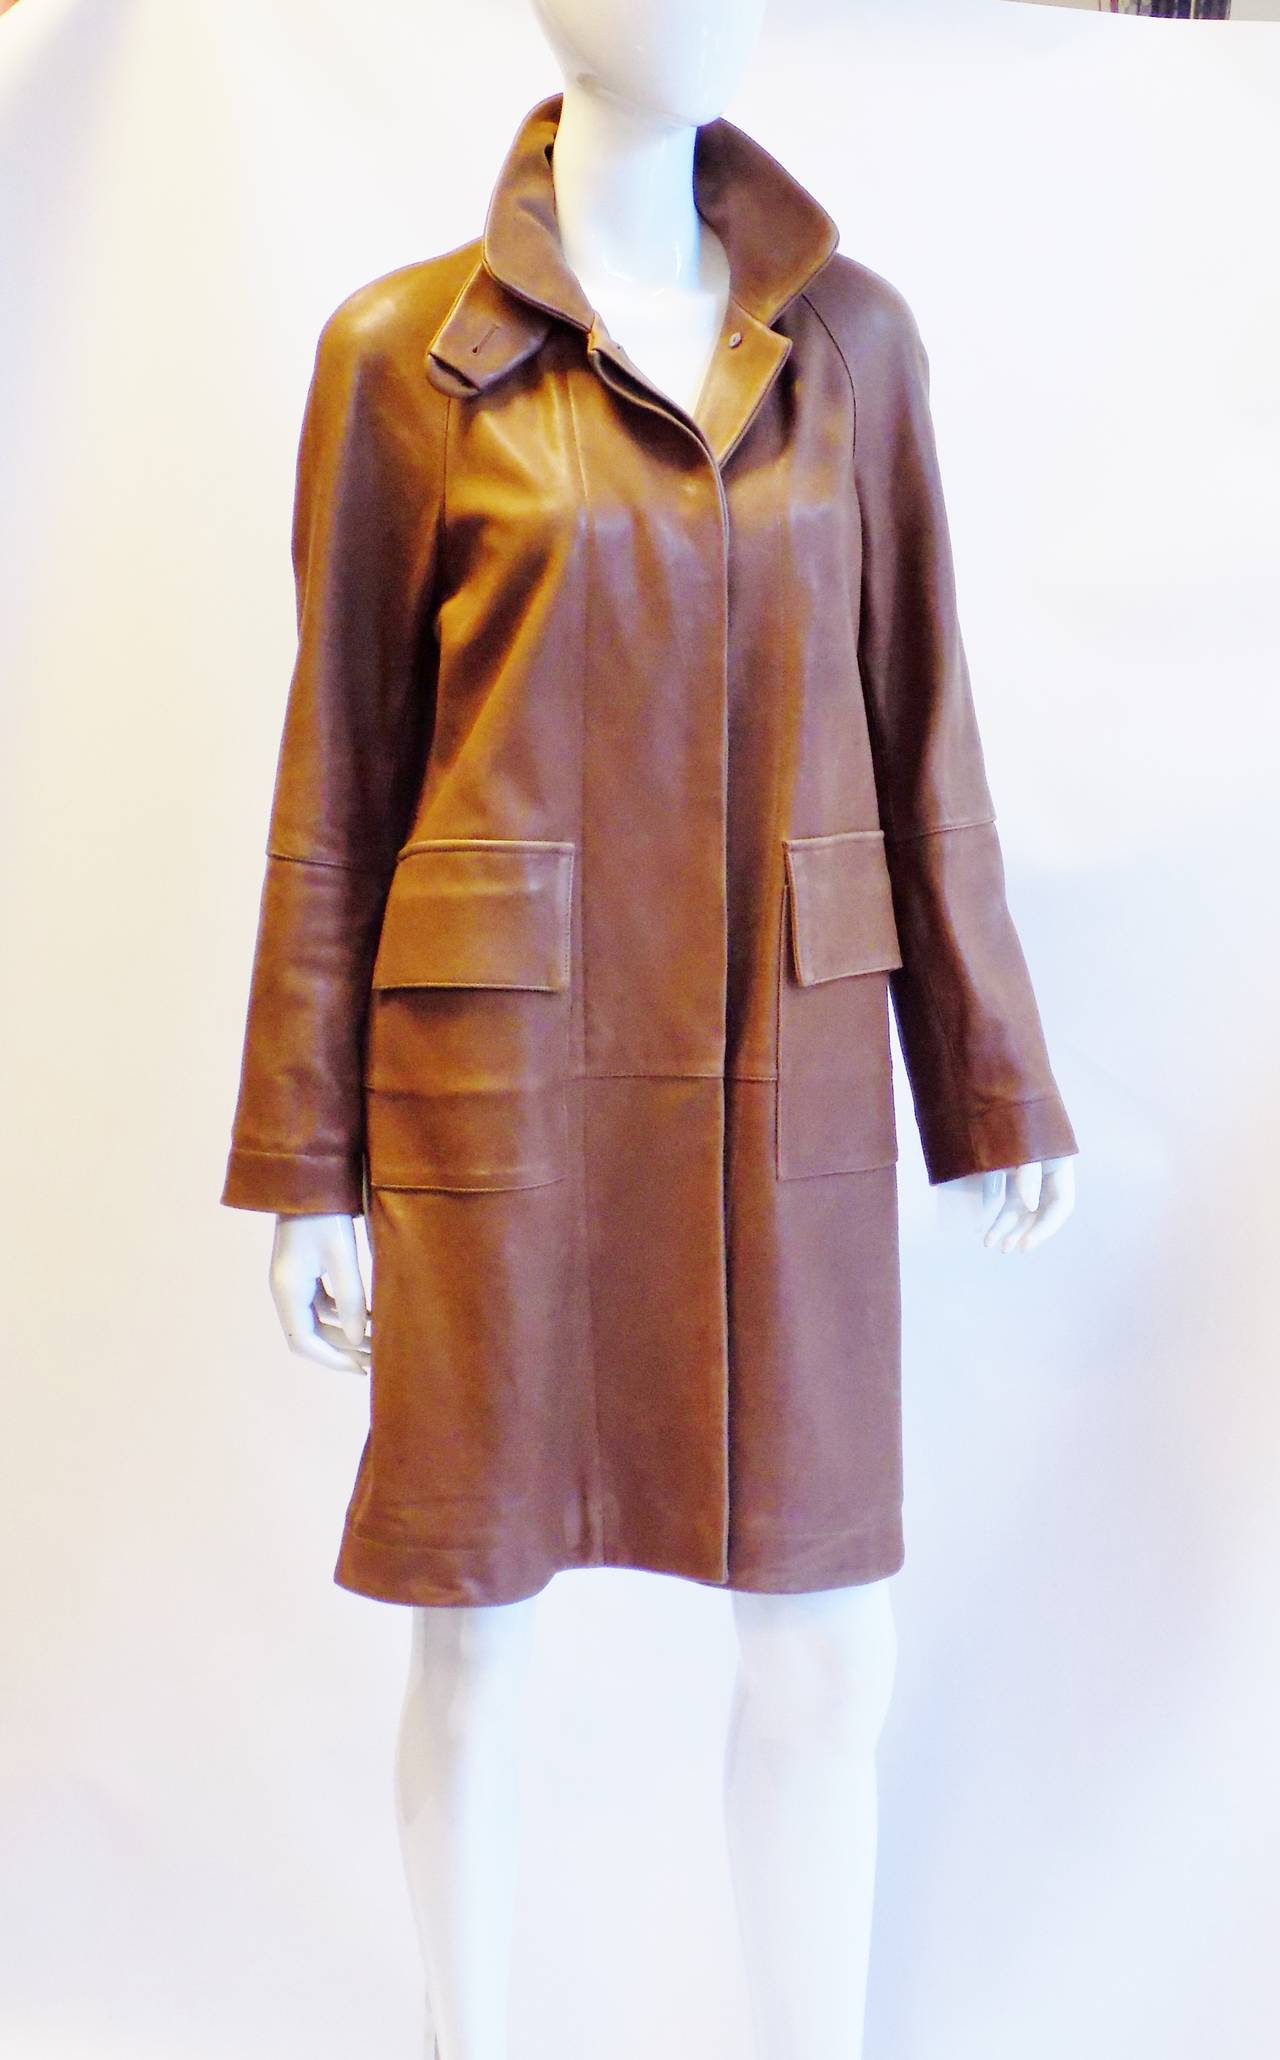 Never worn stunning Marni Lamb Leather Coat in Camel color. Concealed  front button closure. large front patch  pockets . . Great design. Retailed about $6K
Size 42
Bust 40